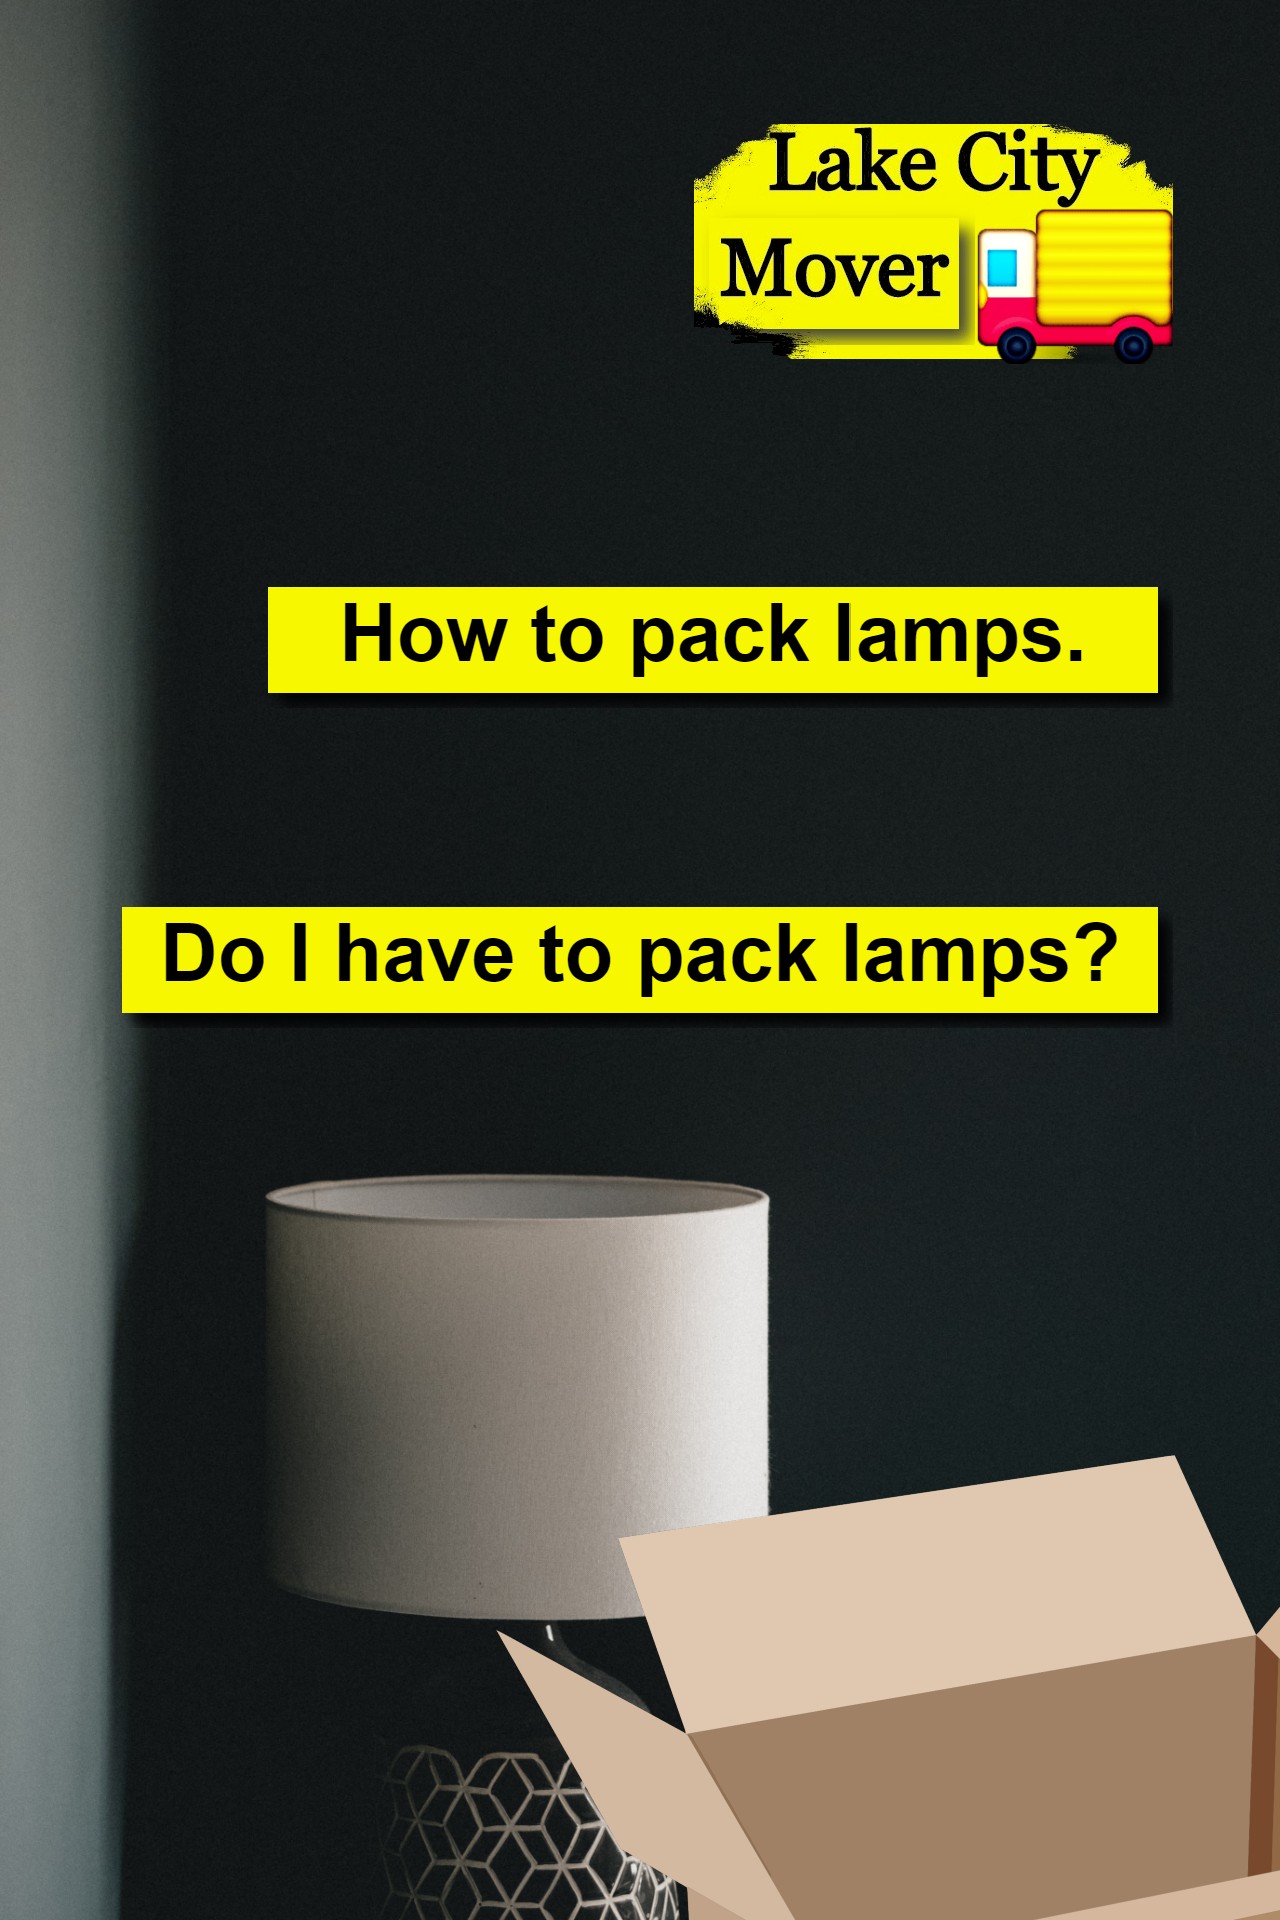 Do I have to pack lamps